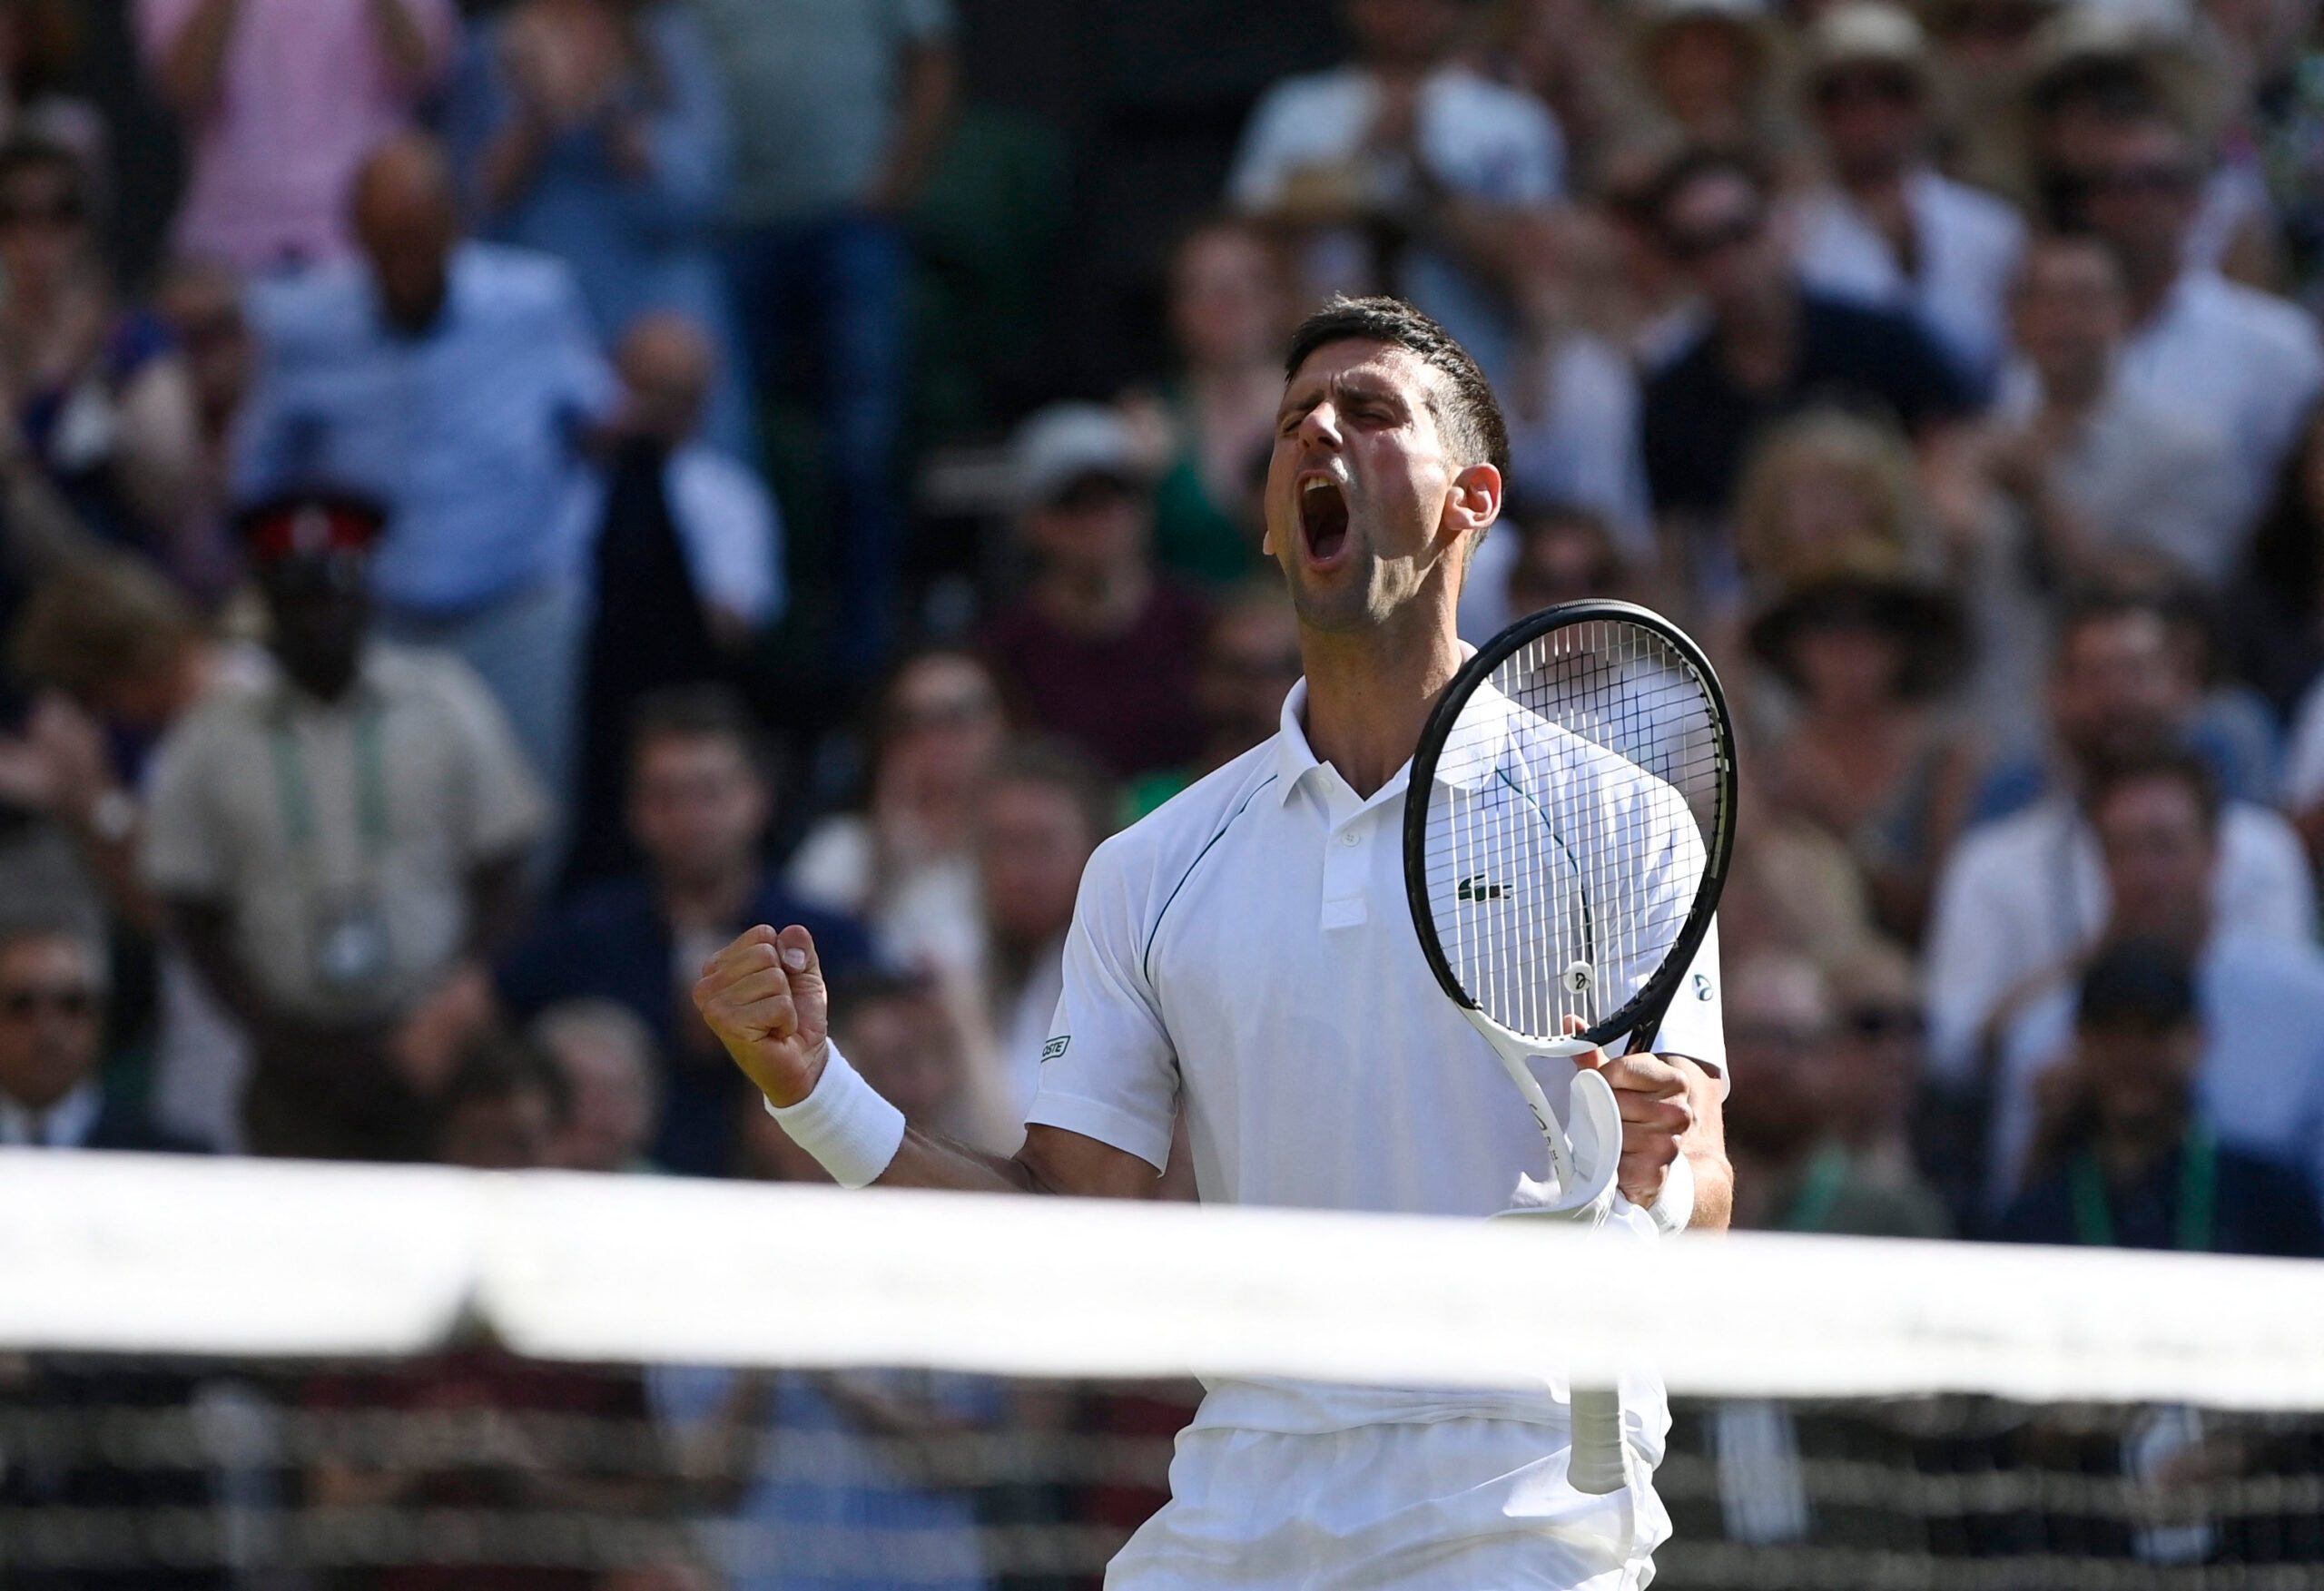 Djokovic hits back to beat Norrie, sets up Kyrgios final